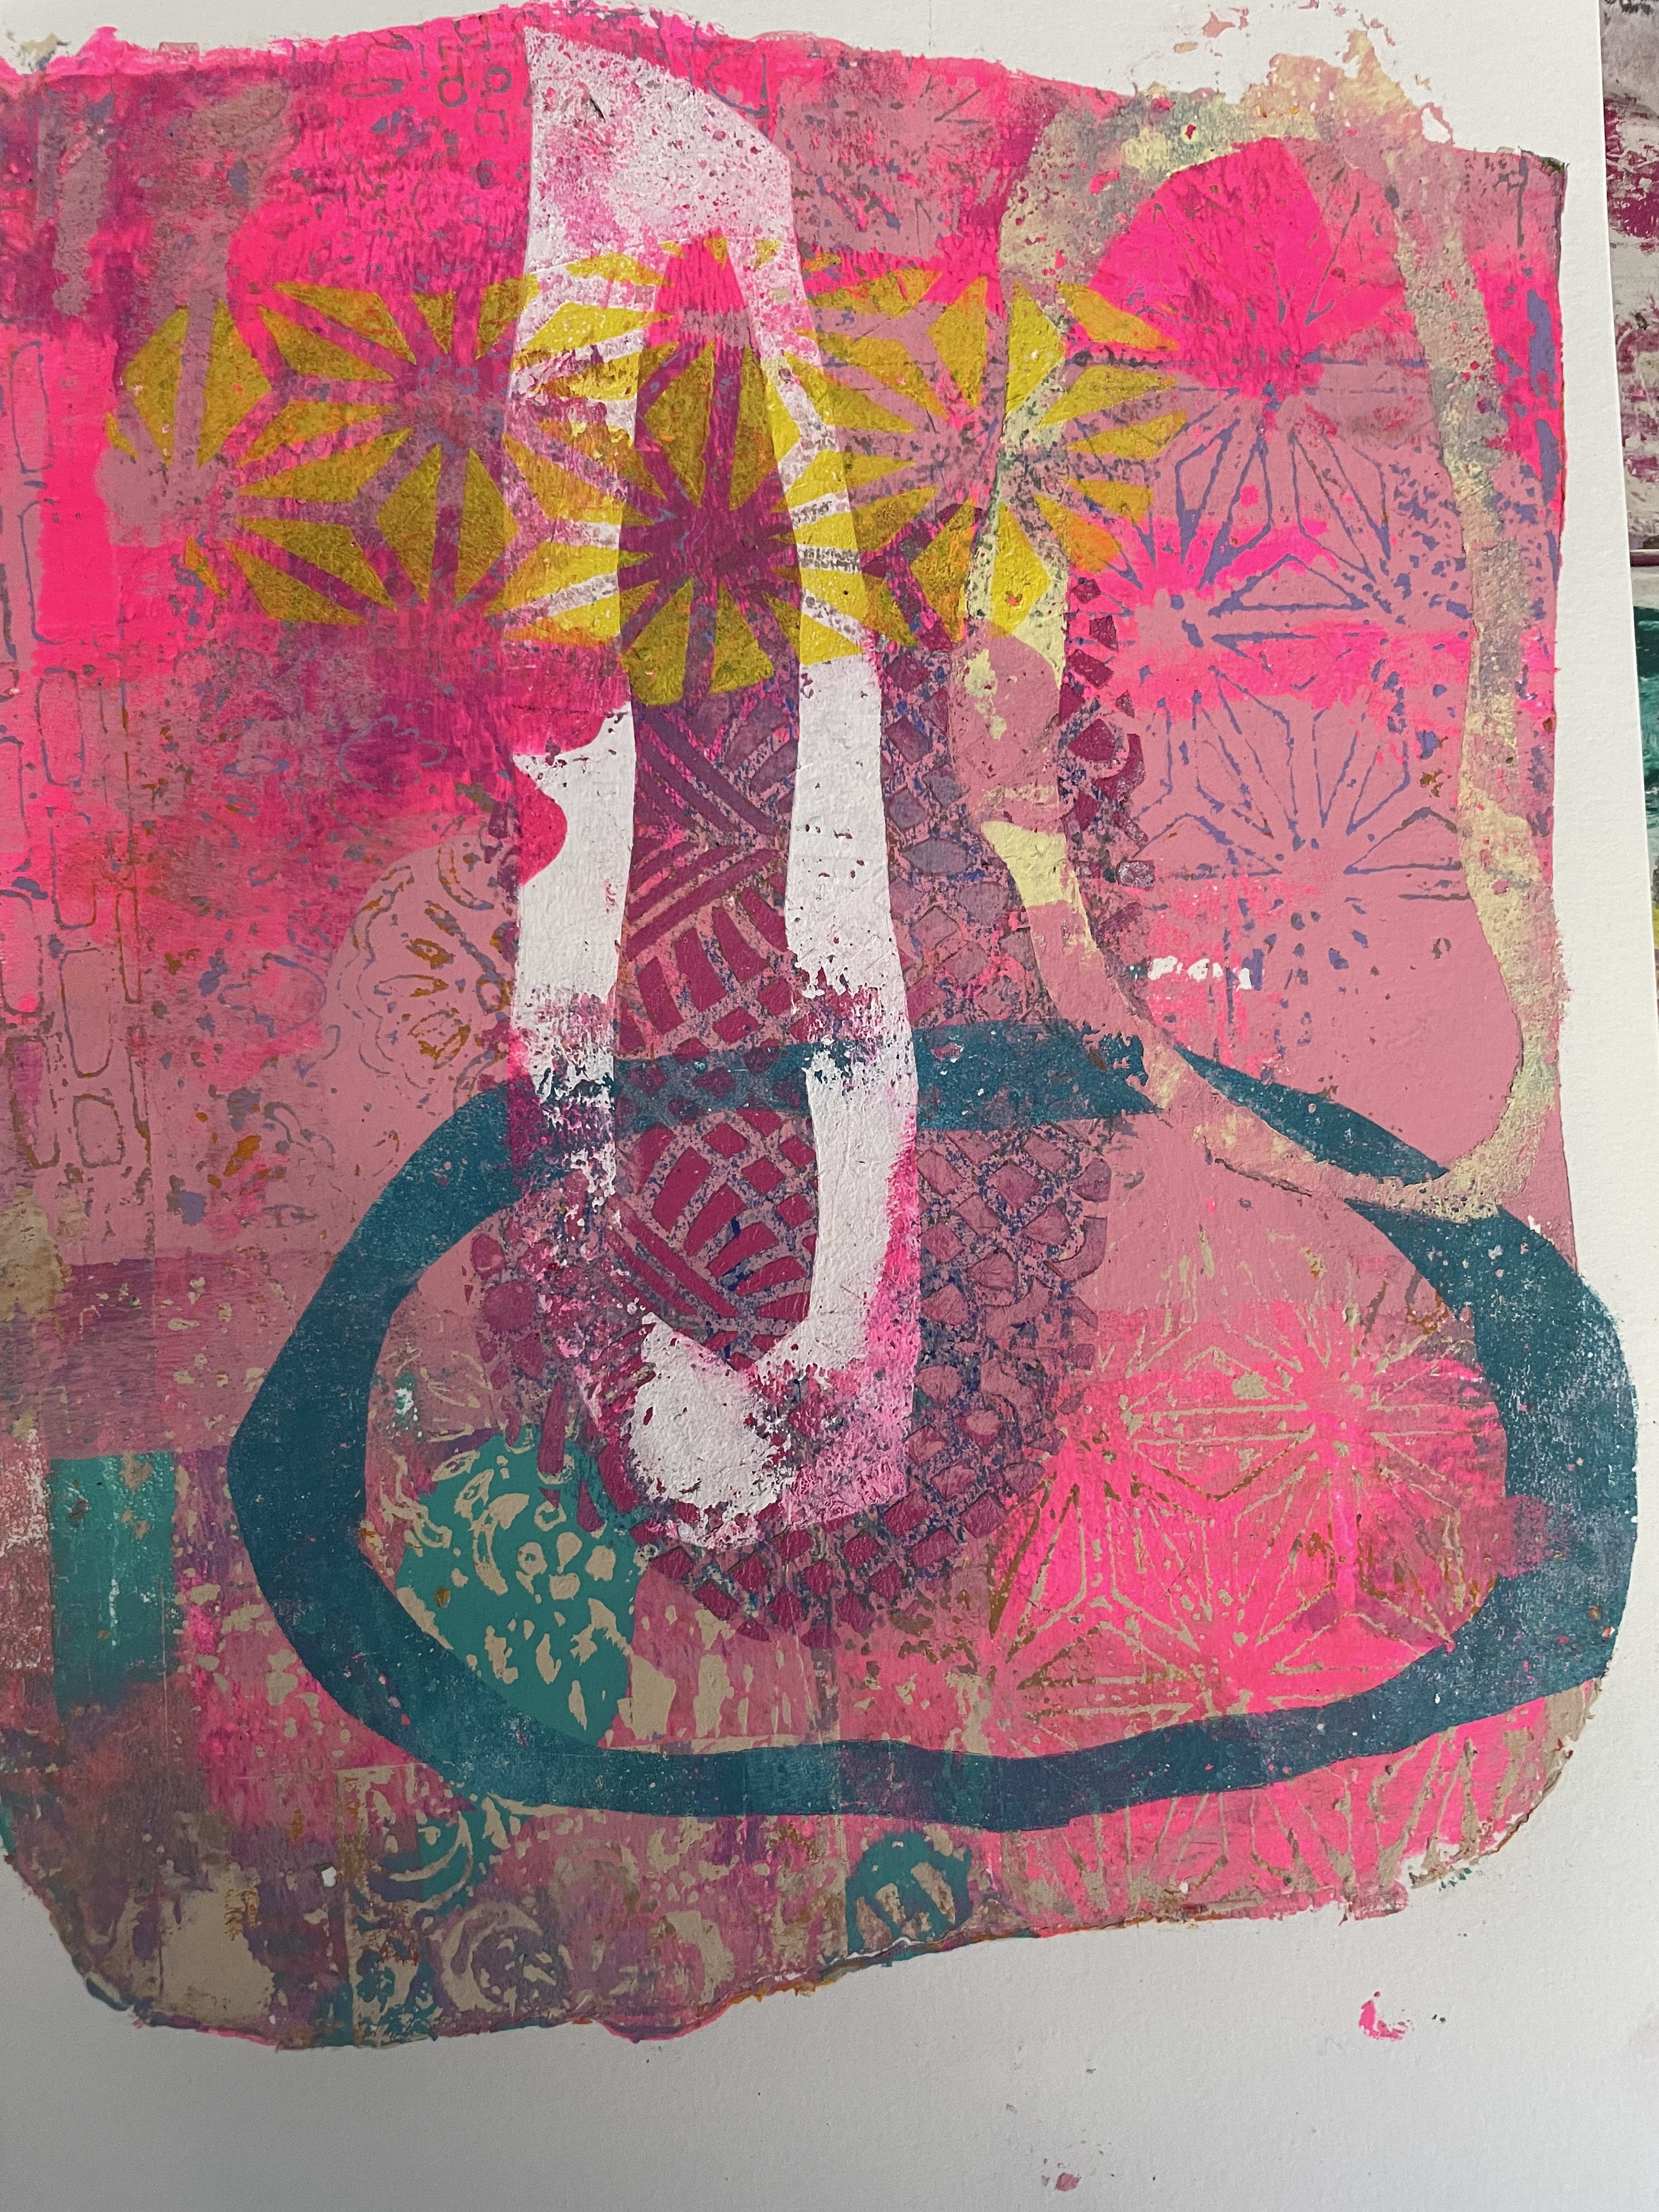 Gelli Plate Printing with Stencils for Making Mixed-Media Backgrounds